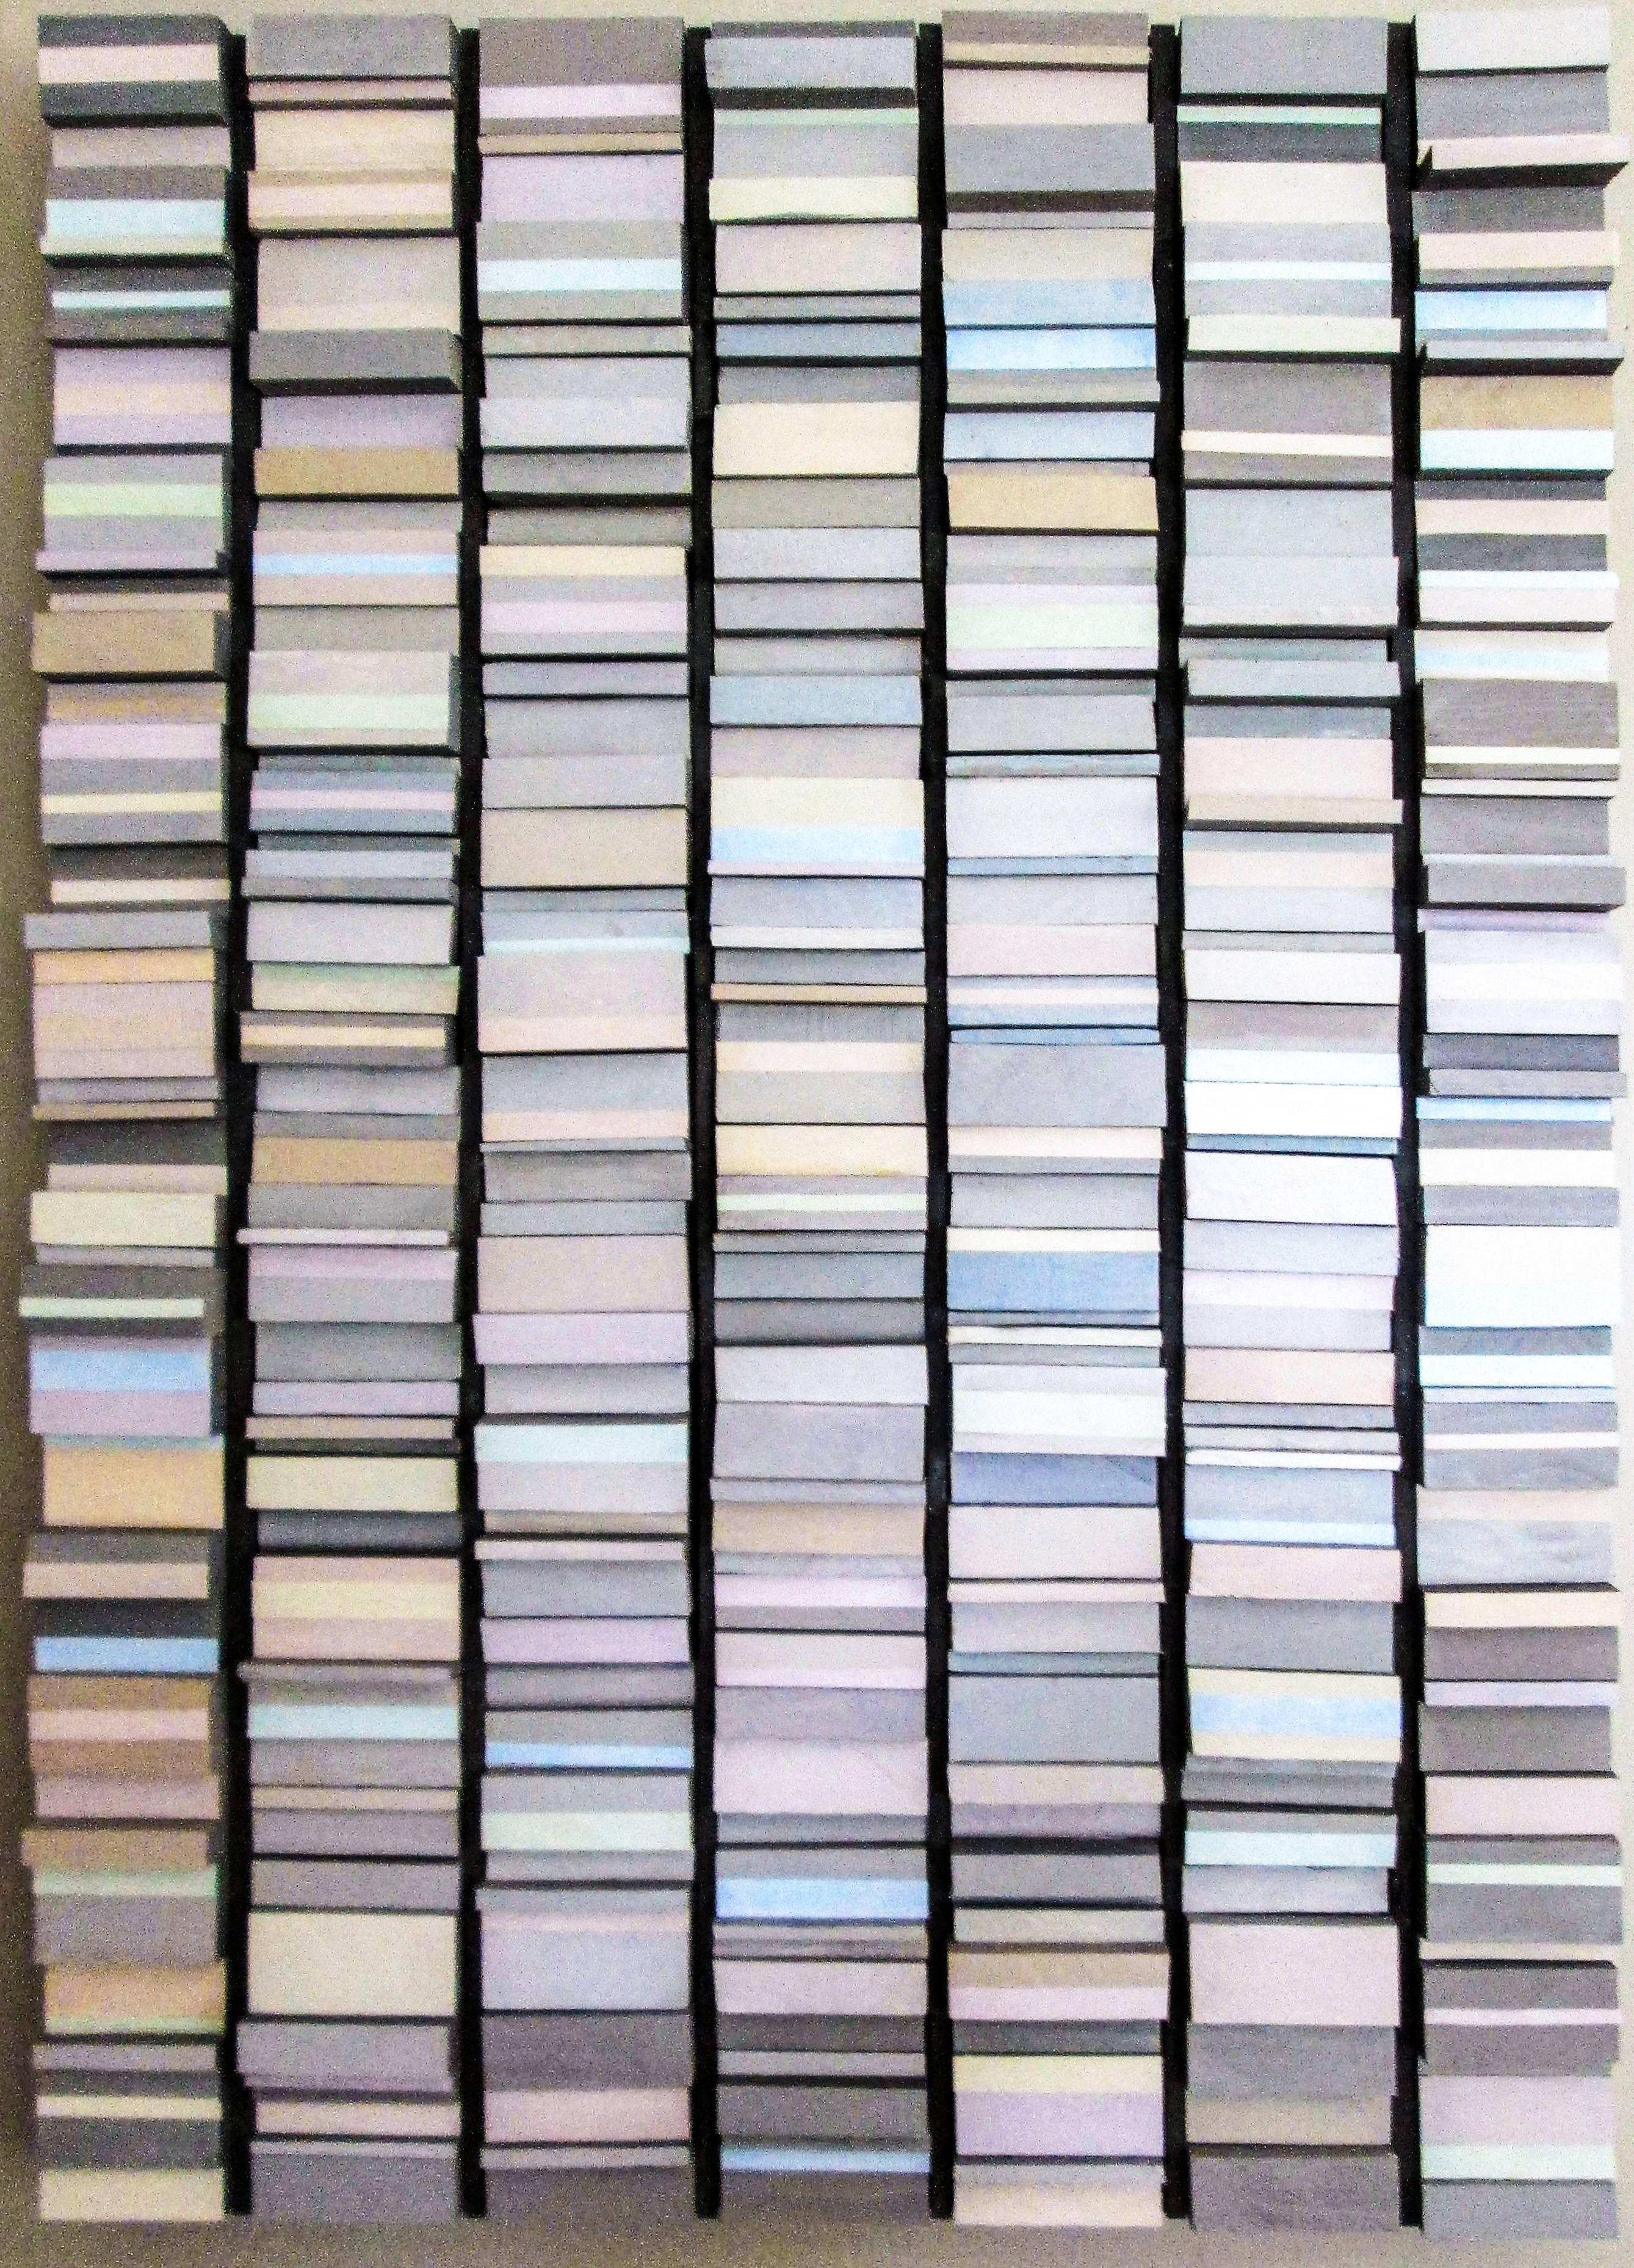 Stephen Walling Abstract Painting - All in a Row (Pastel & Gray 3 Dimensional Wall Sculpture)